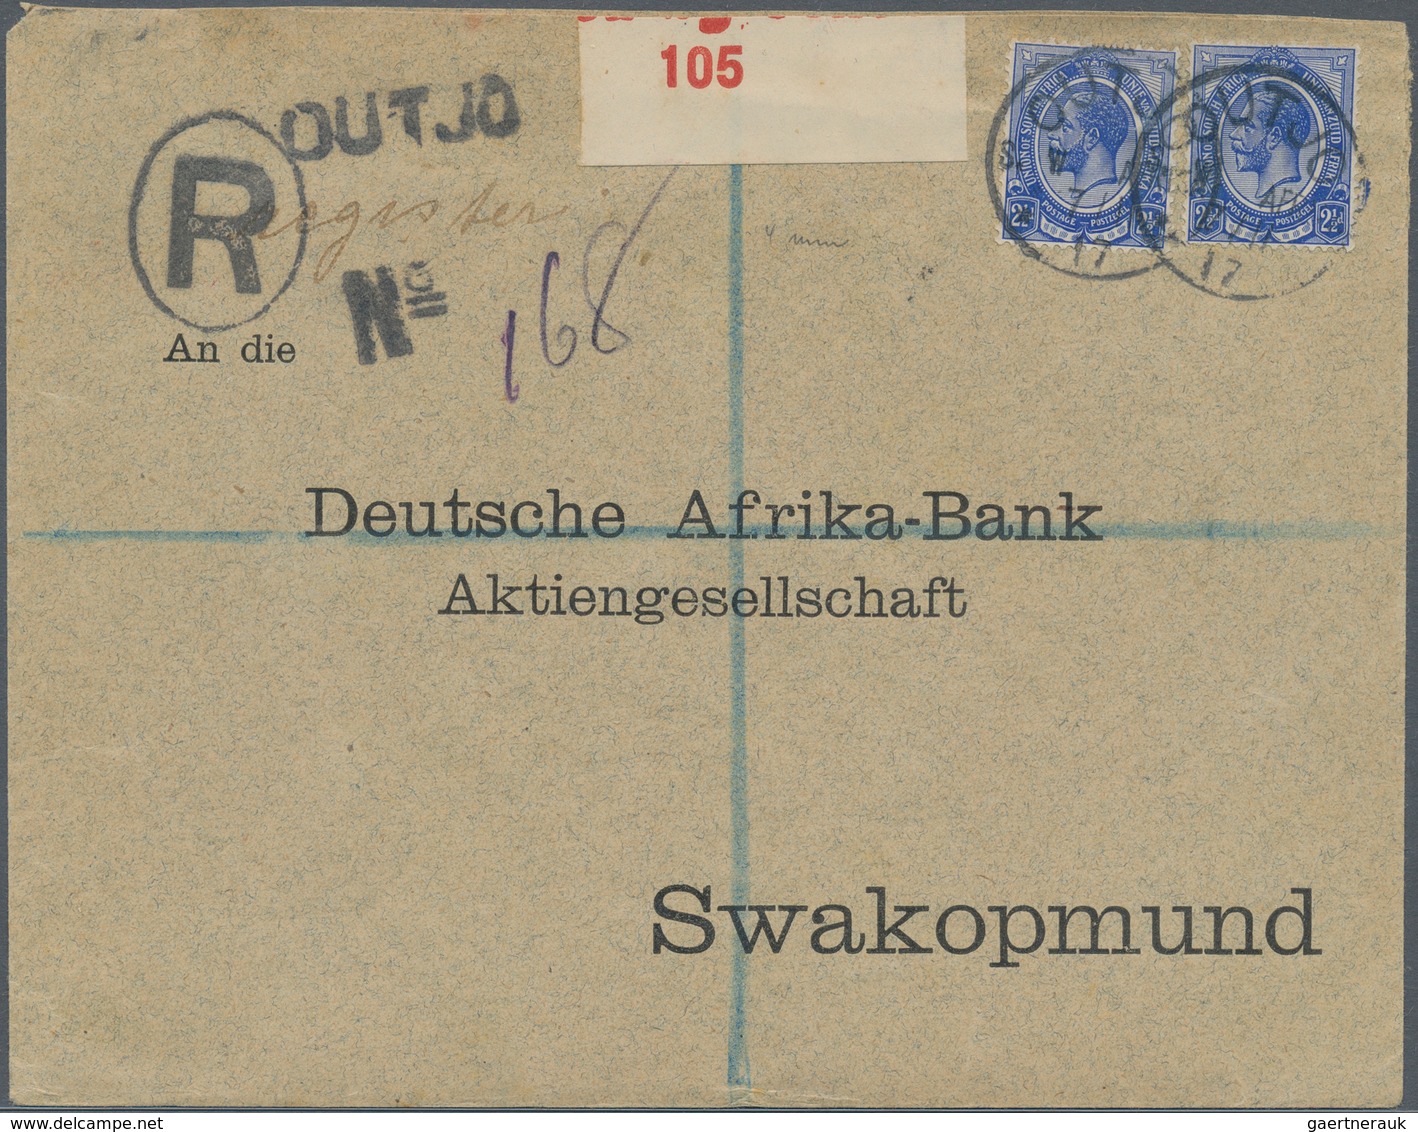 Südwestafrika: 1915/1919, 48 covers and fronts of covers, all with KGV frankings and mostly opened a